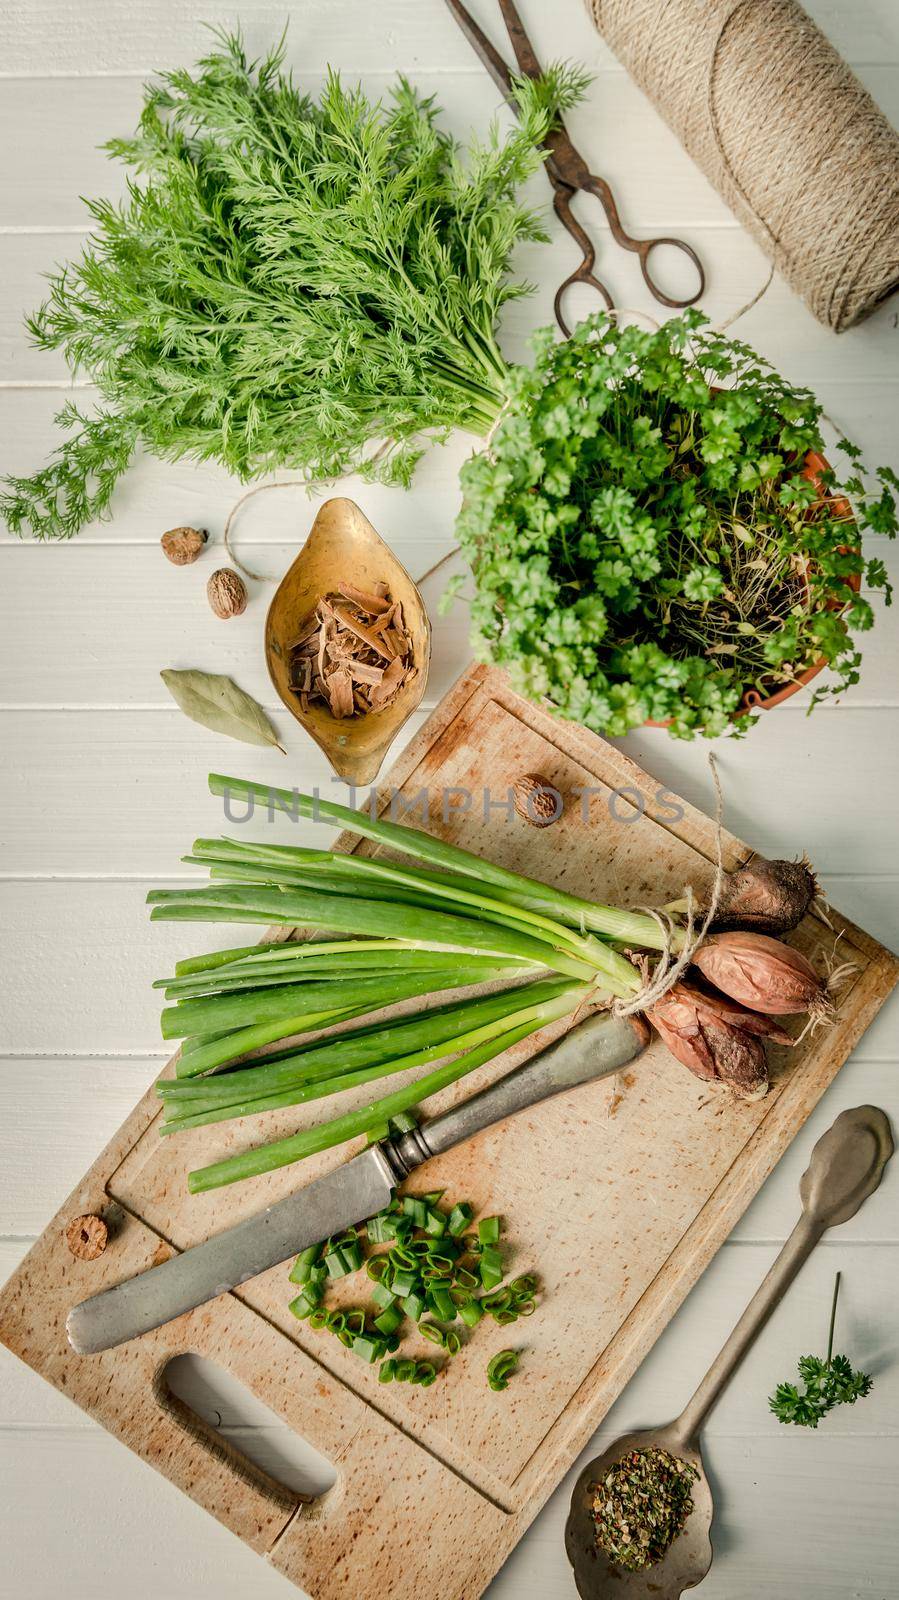 Green onion, dill on the cutting board, rustic silverware on table, spices, preparation process, topshot